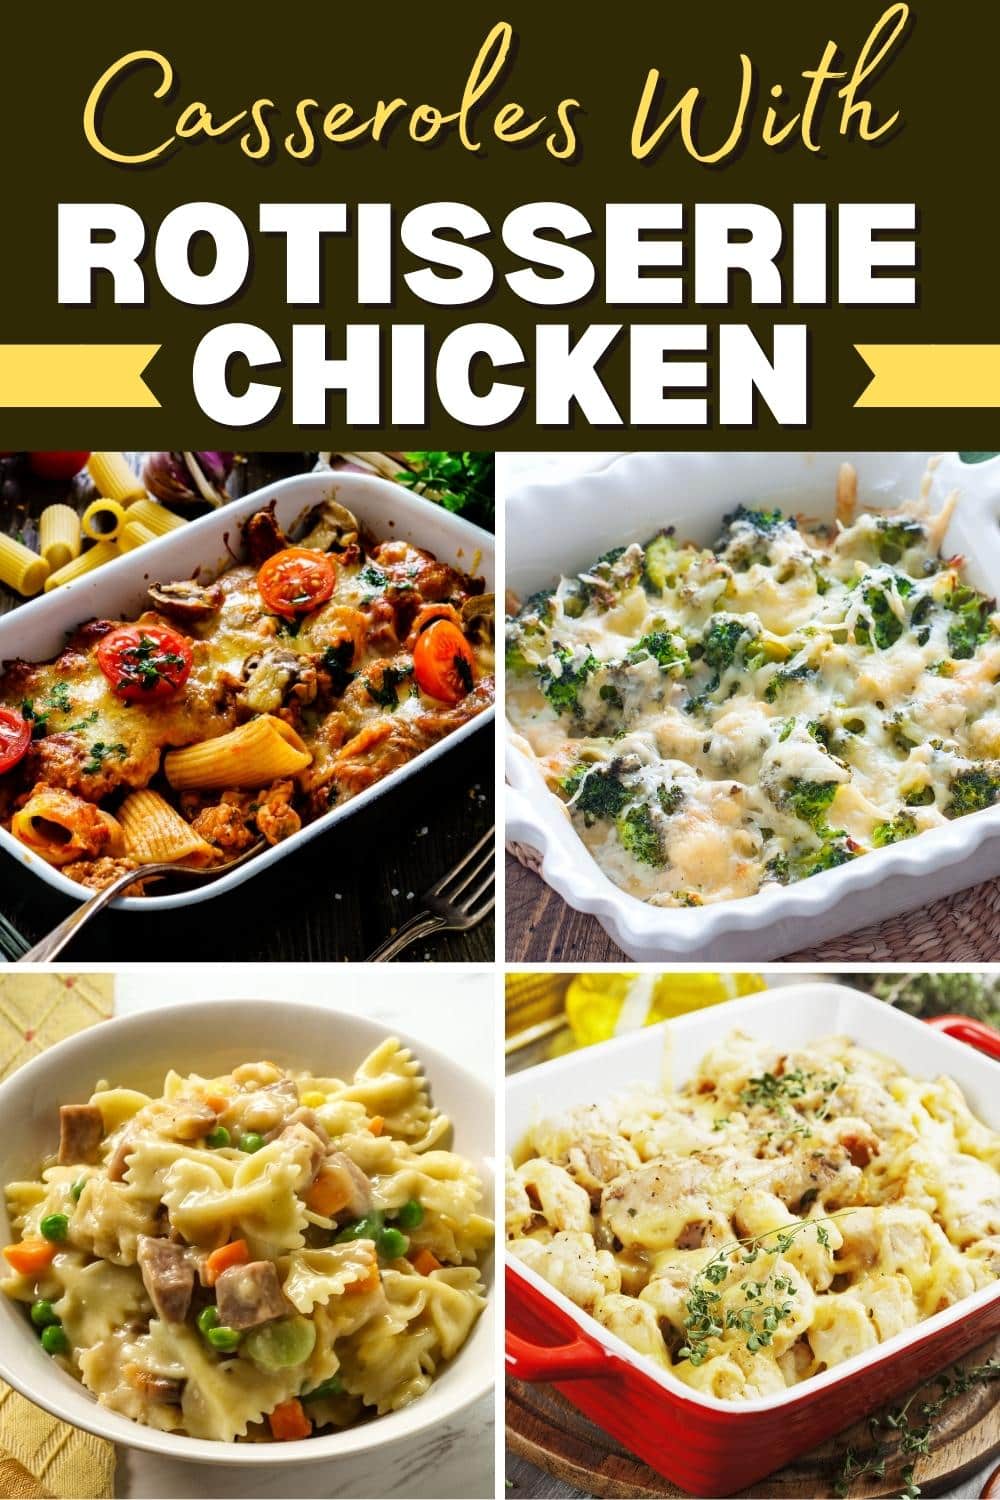 23 Easy Casseroles with Rotisserie Chicken - Insanely Good